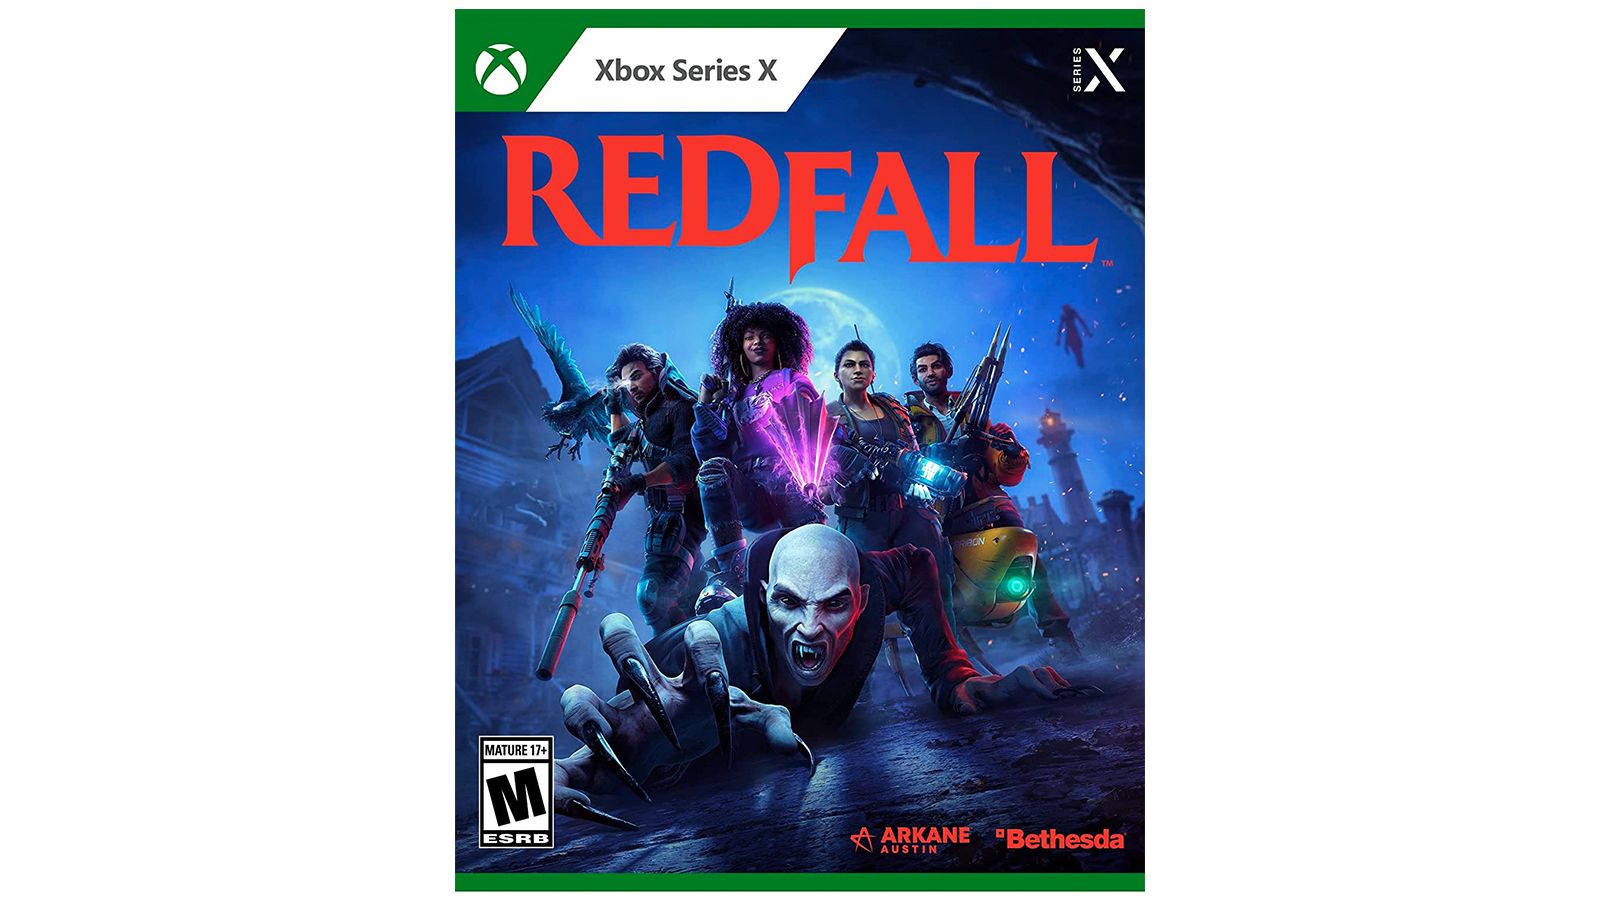 Redfall will have full crossplay between PC platforms and Xbox